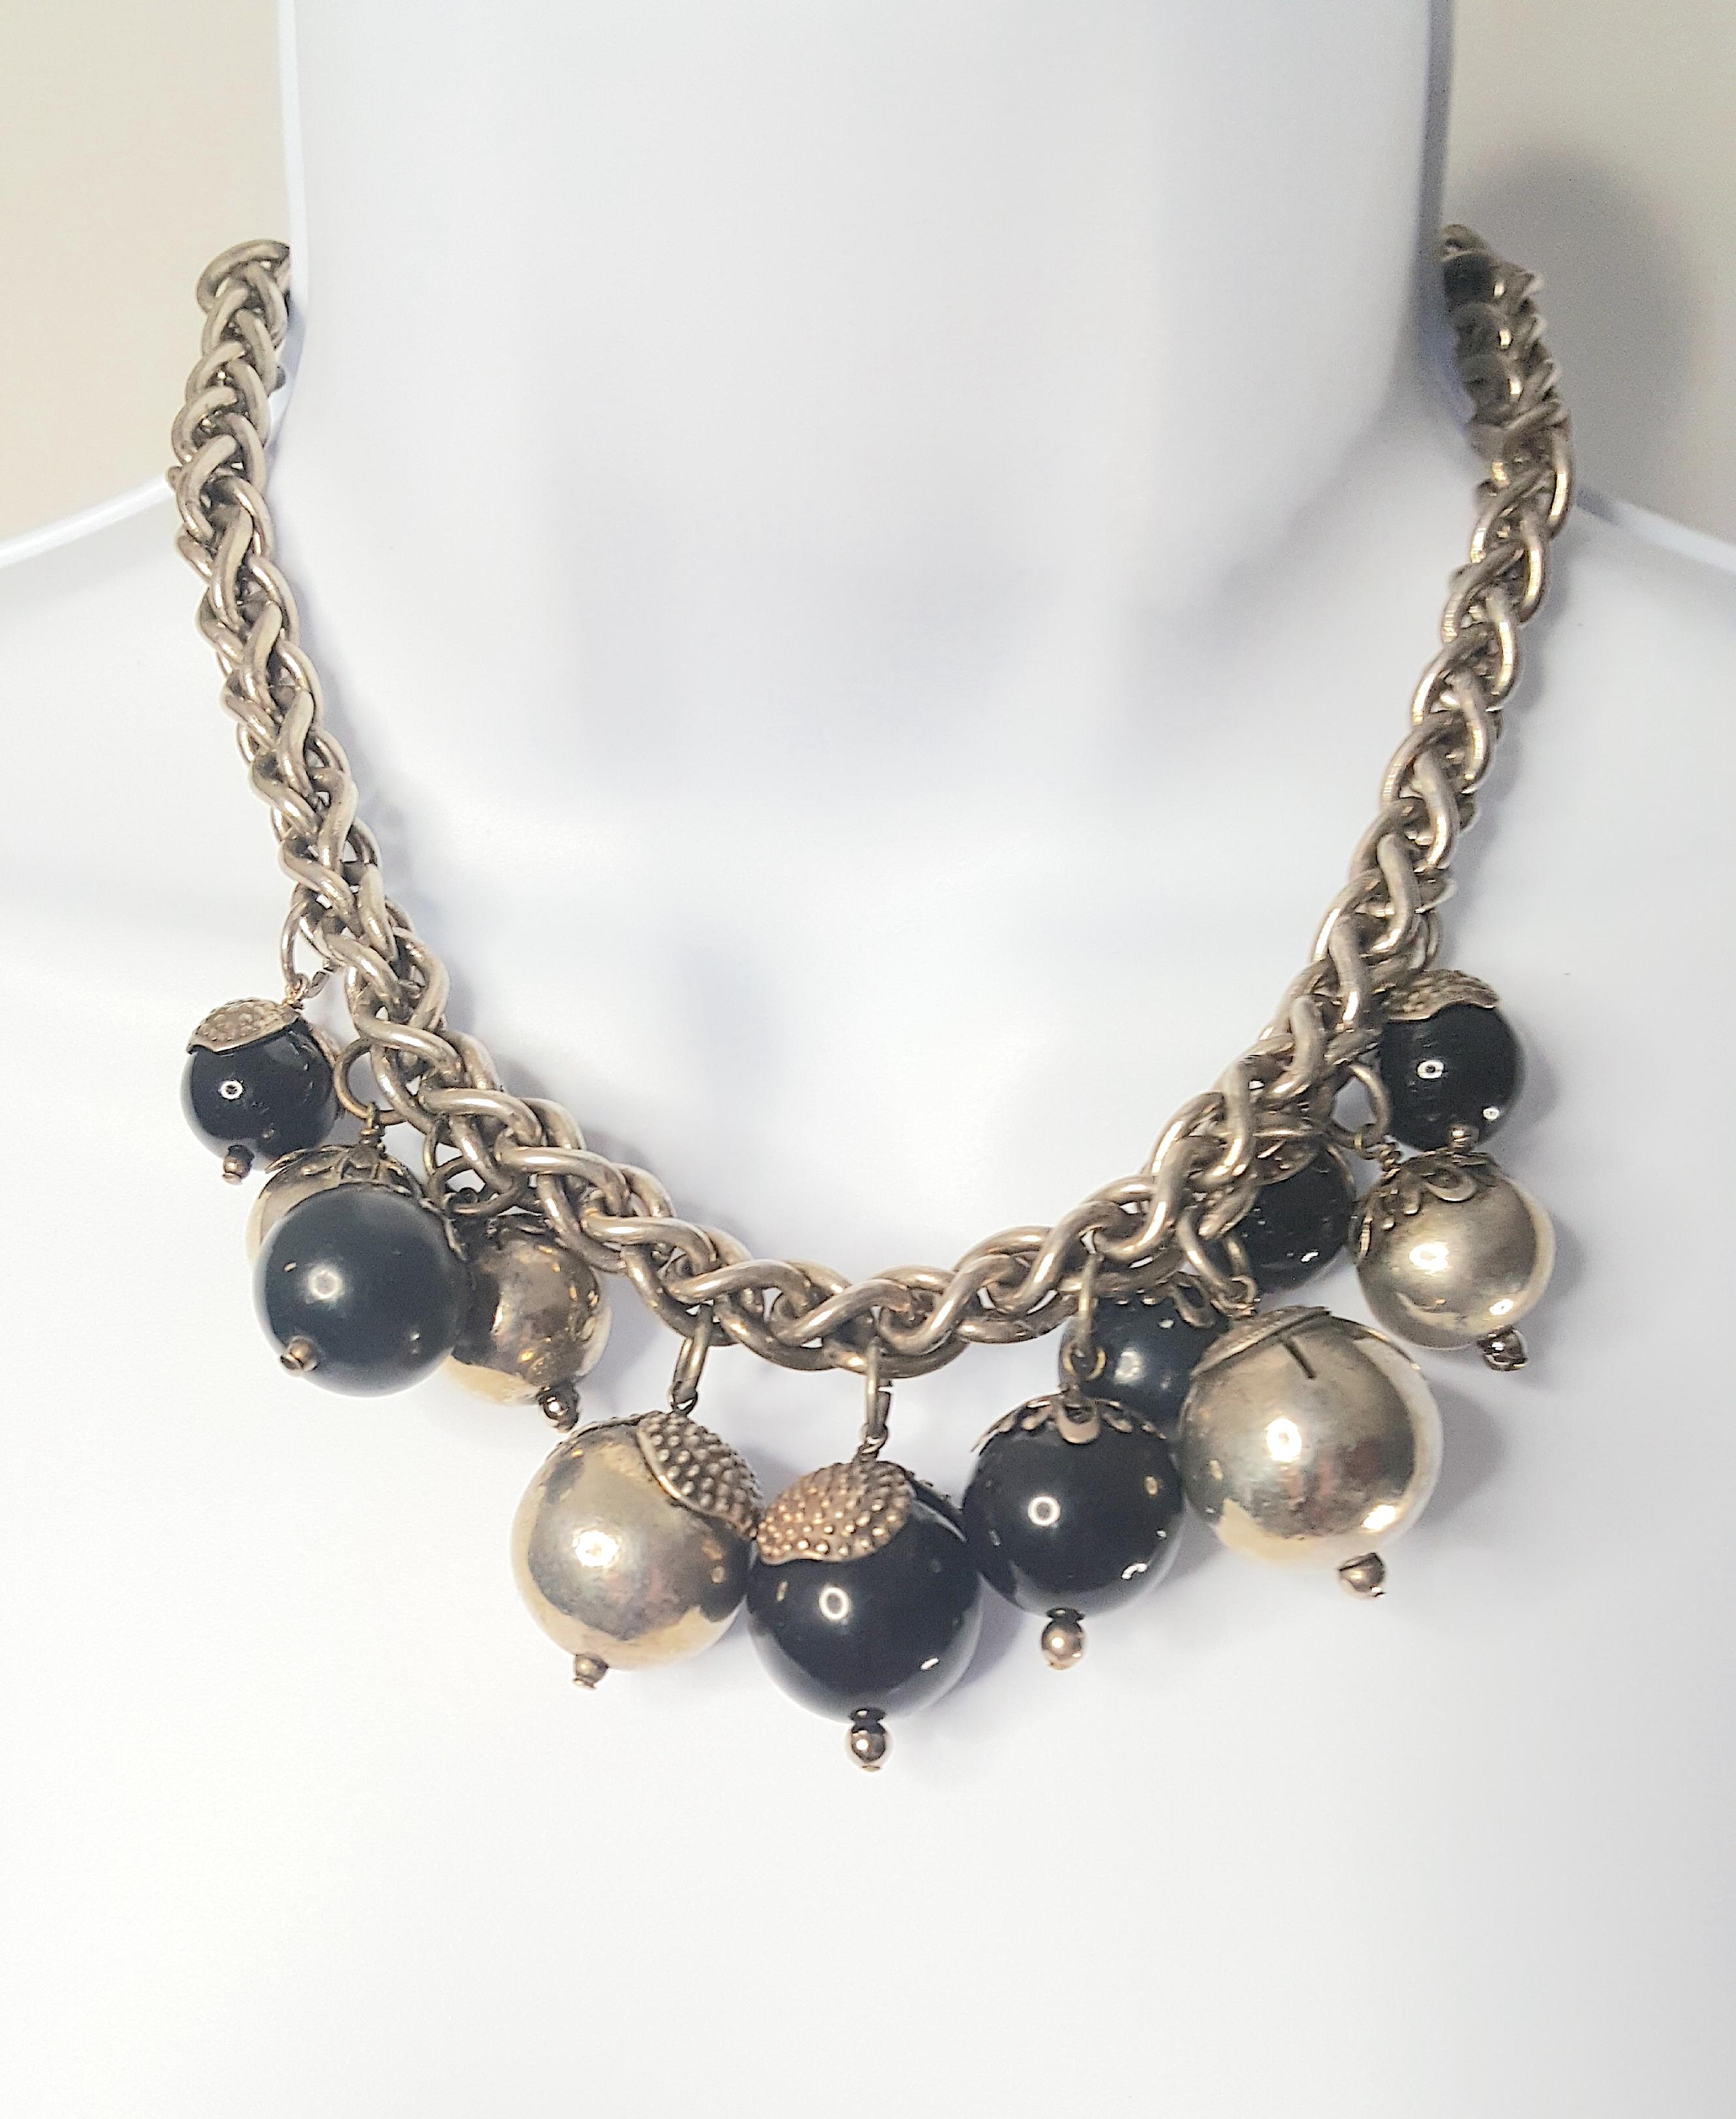 Featuring 12 large patinated pearlescent charms distinctly handcrafted by Parisian Louis Rousselet--the master glass-and-metal-ornament parurier for French couture fashion houses since 1920--this heavy silver chain necklace is made in the unique